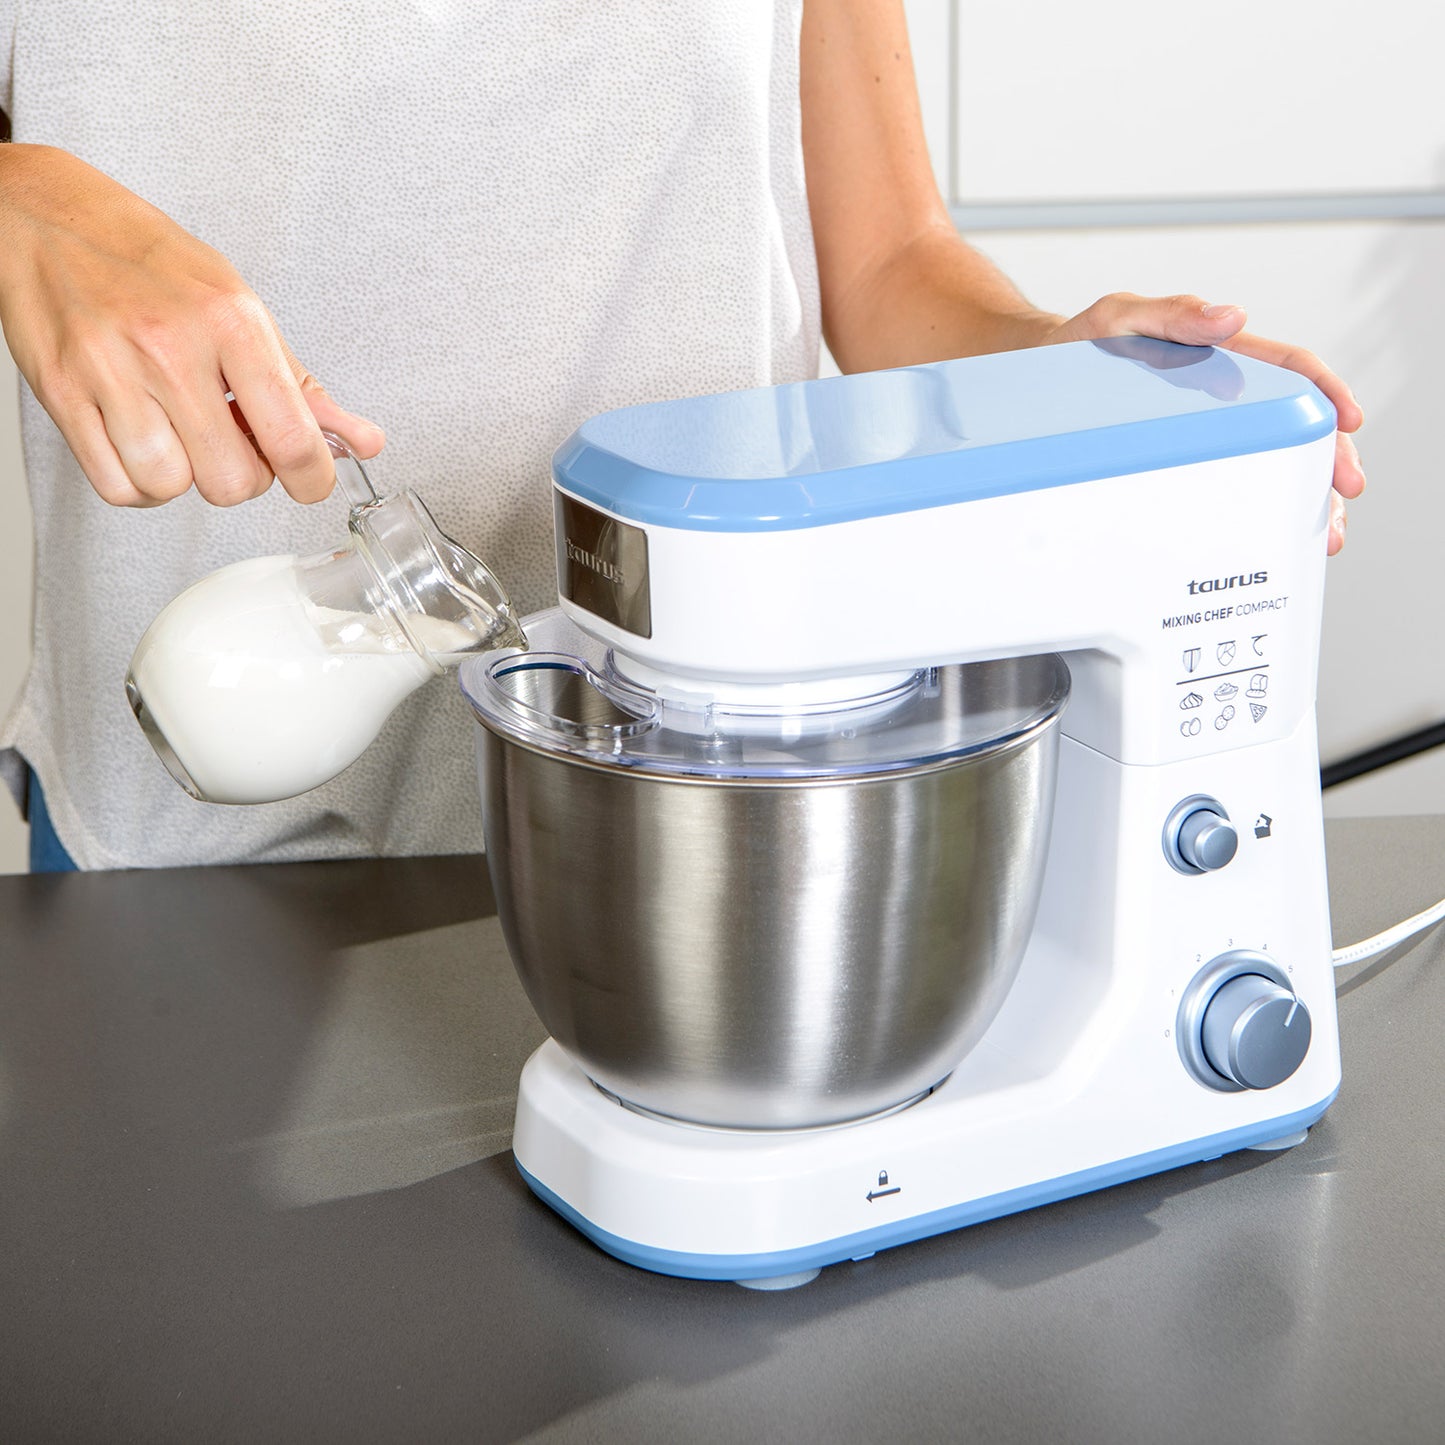 MIXING CHEF COMPACT